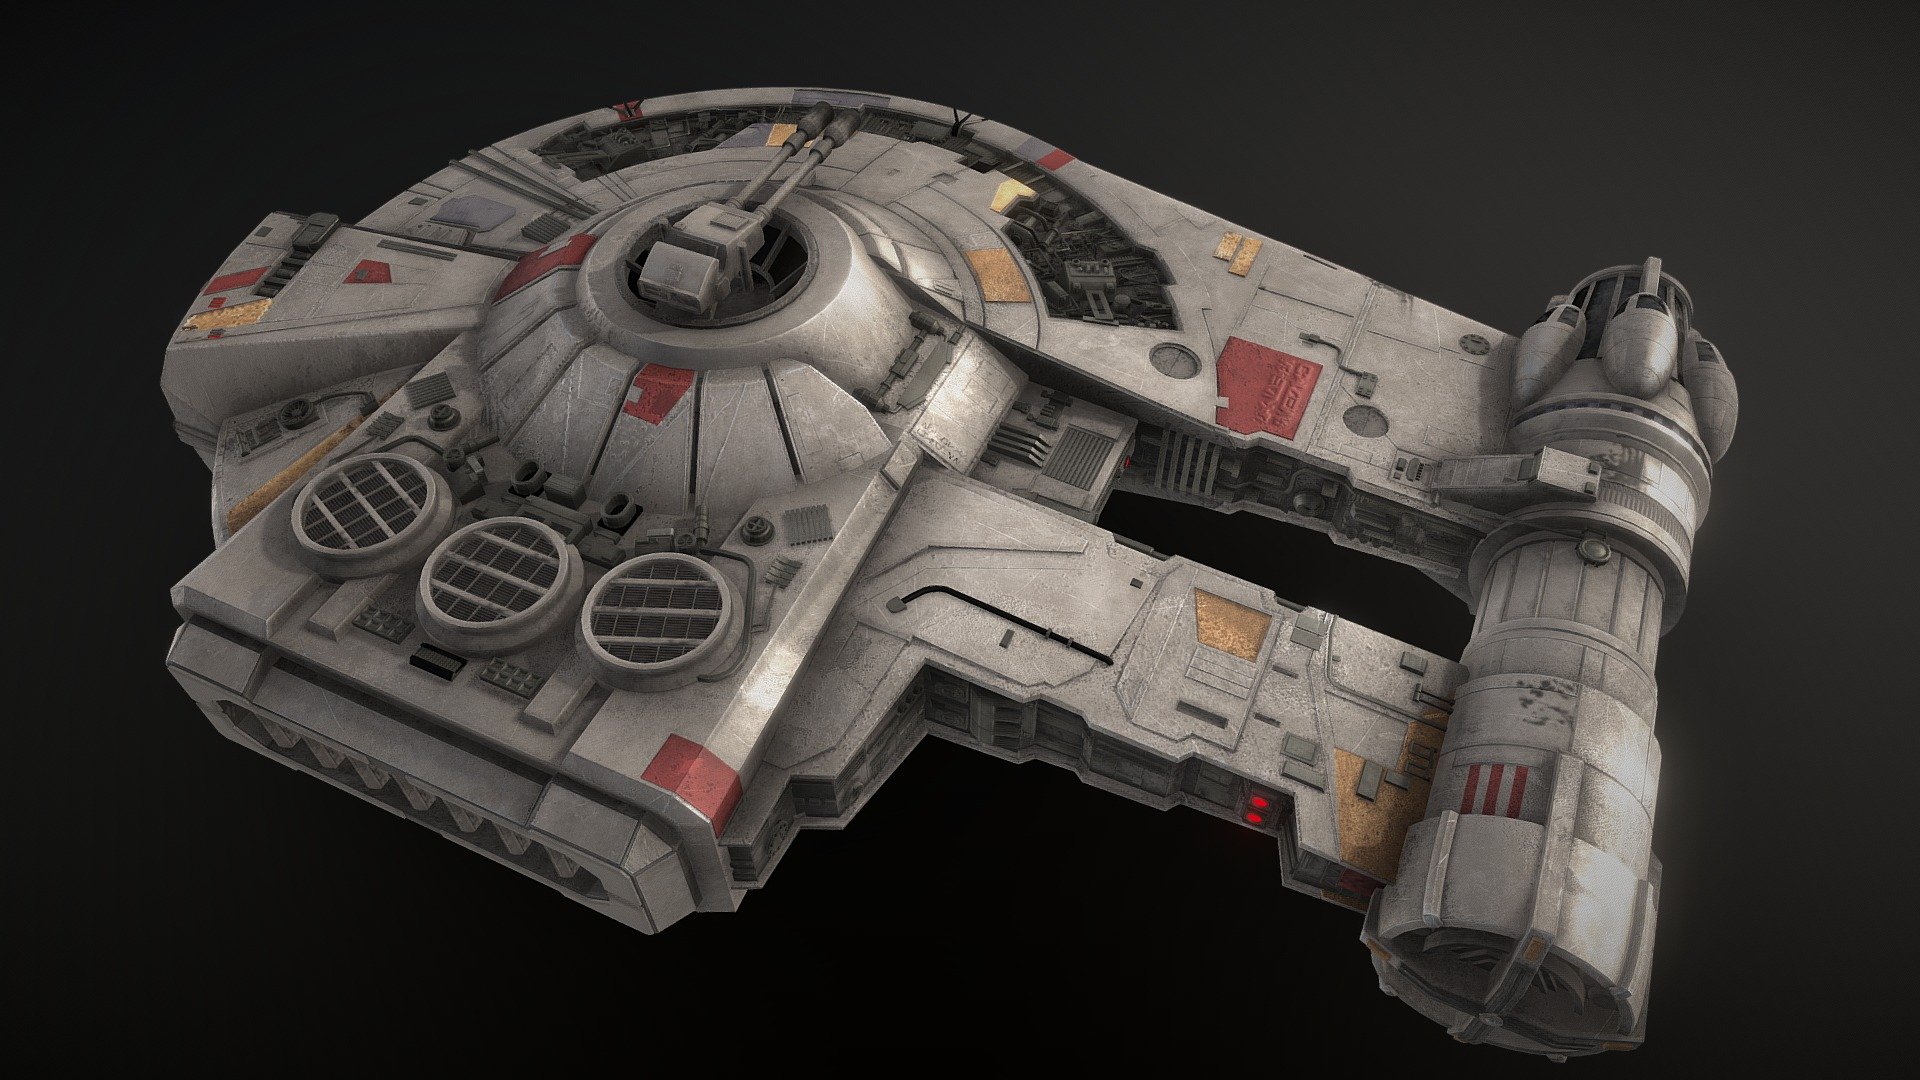 Outrider - YT-2400 light freighter